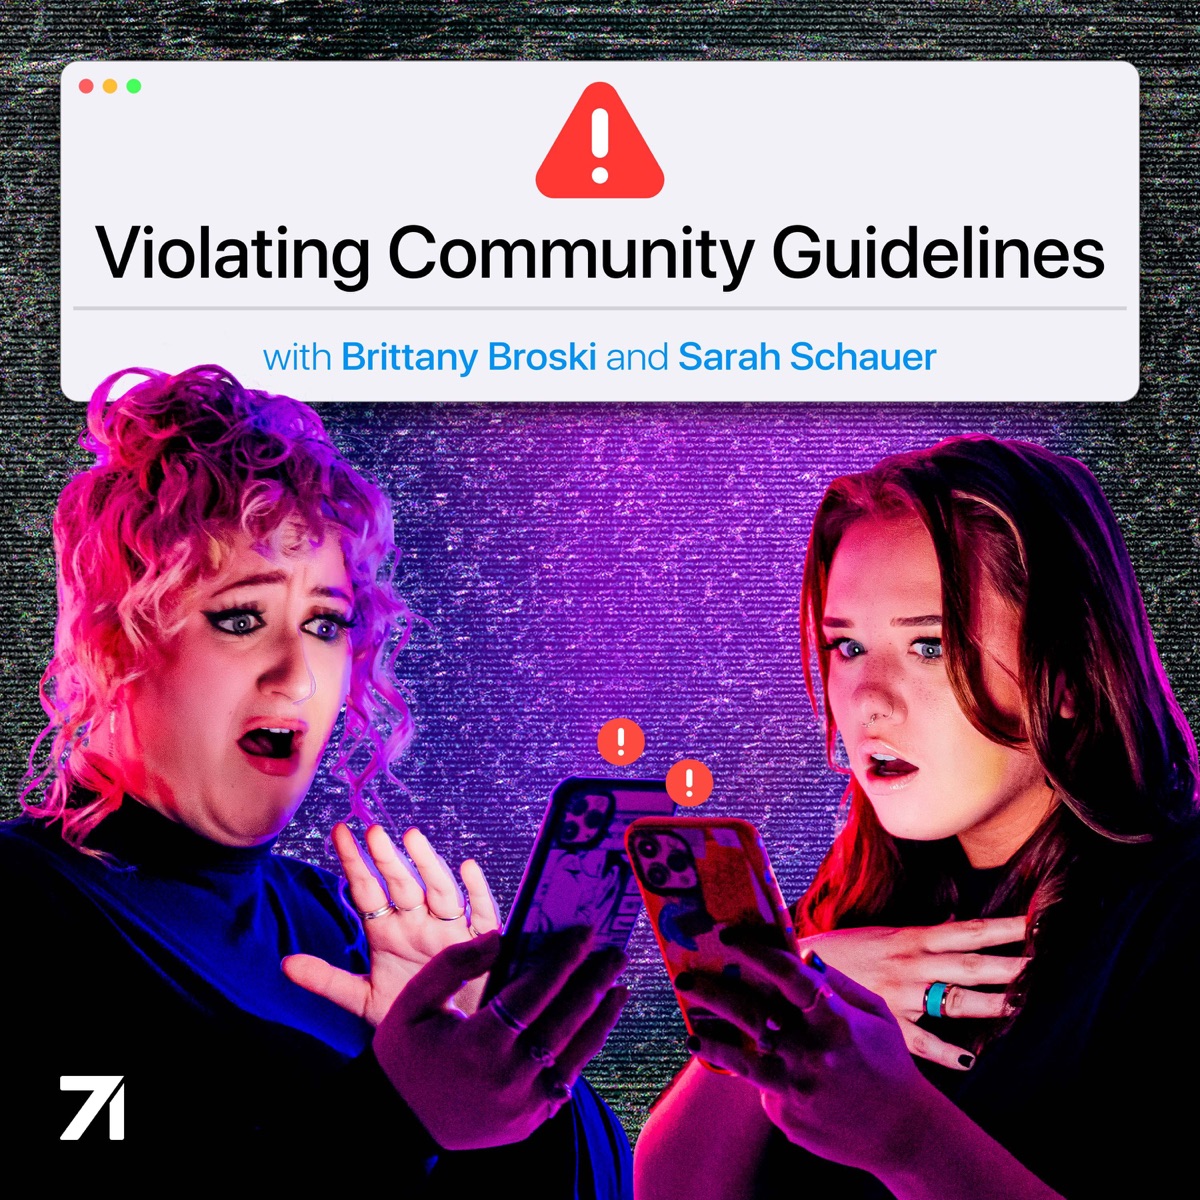 Violating Community Guidelines with Brittany Broski and Sarah Schauer Trailer